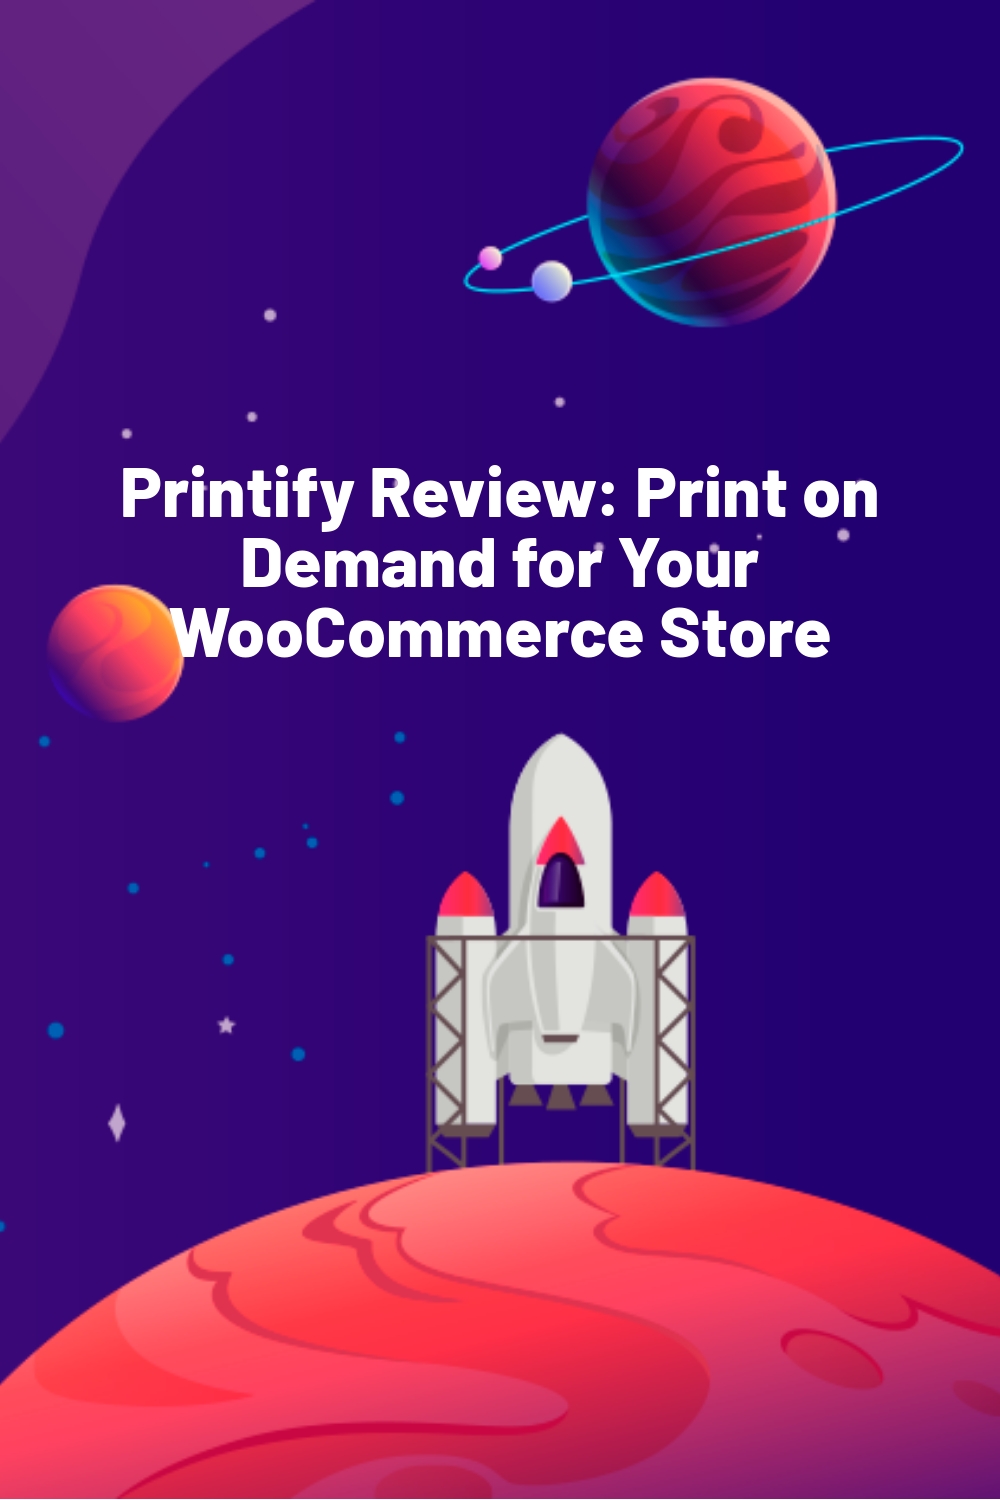 Printify Review: Print on Demand for Your WooCommerce Store